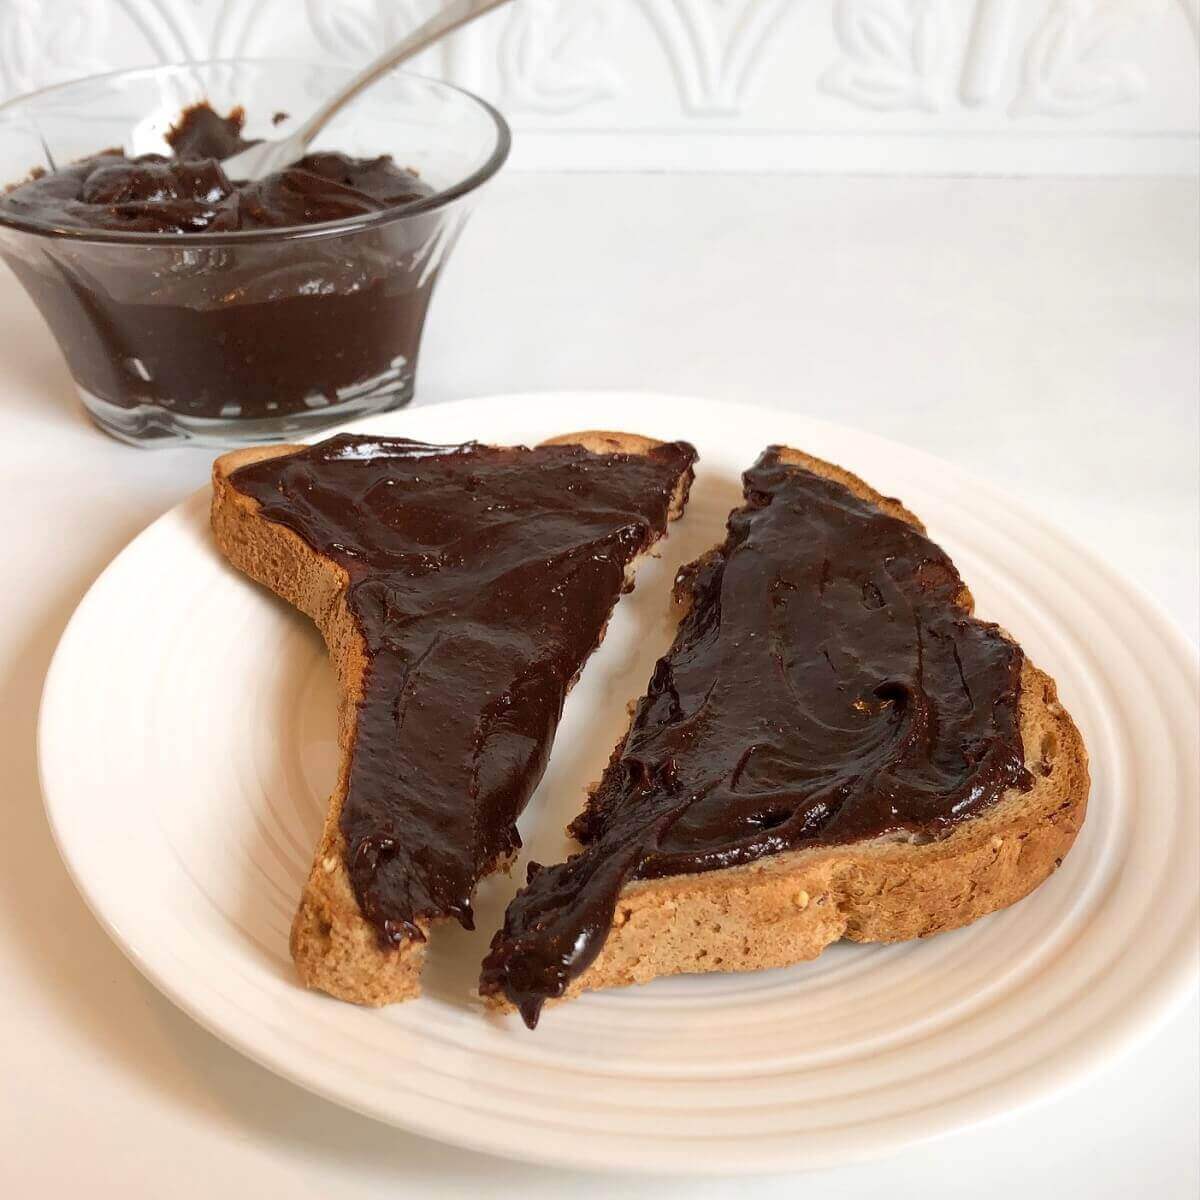 A glass dish full of nut-free chocolate spread next to some toast.